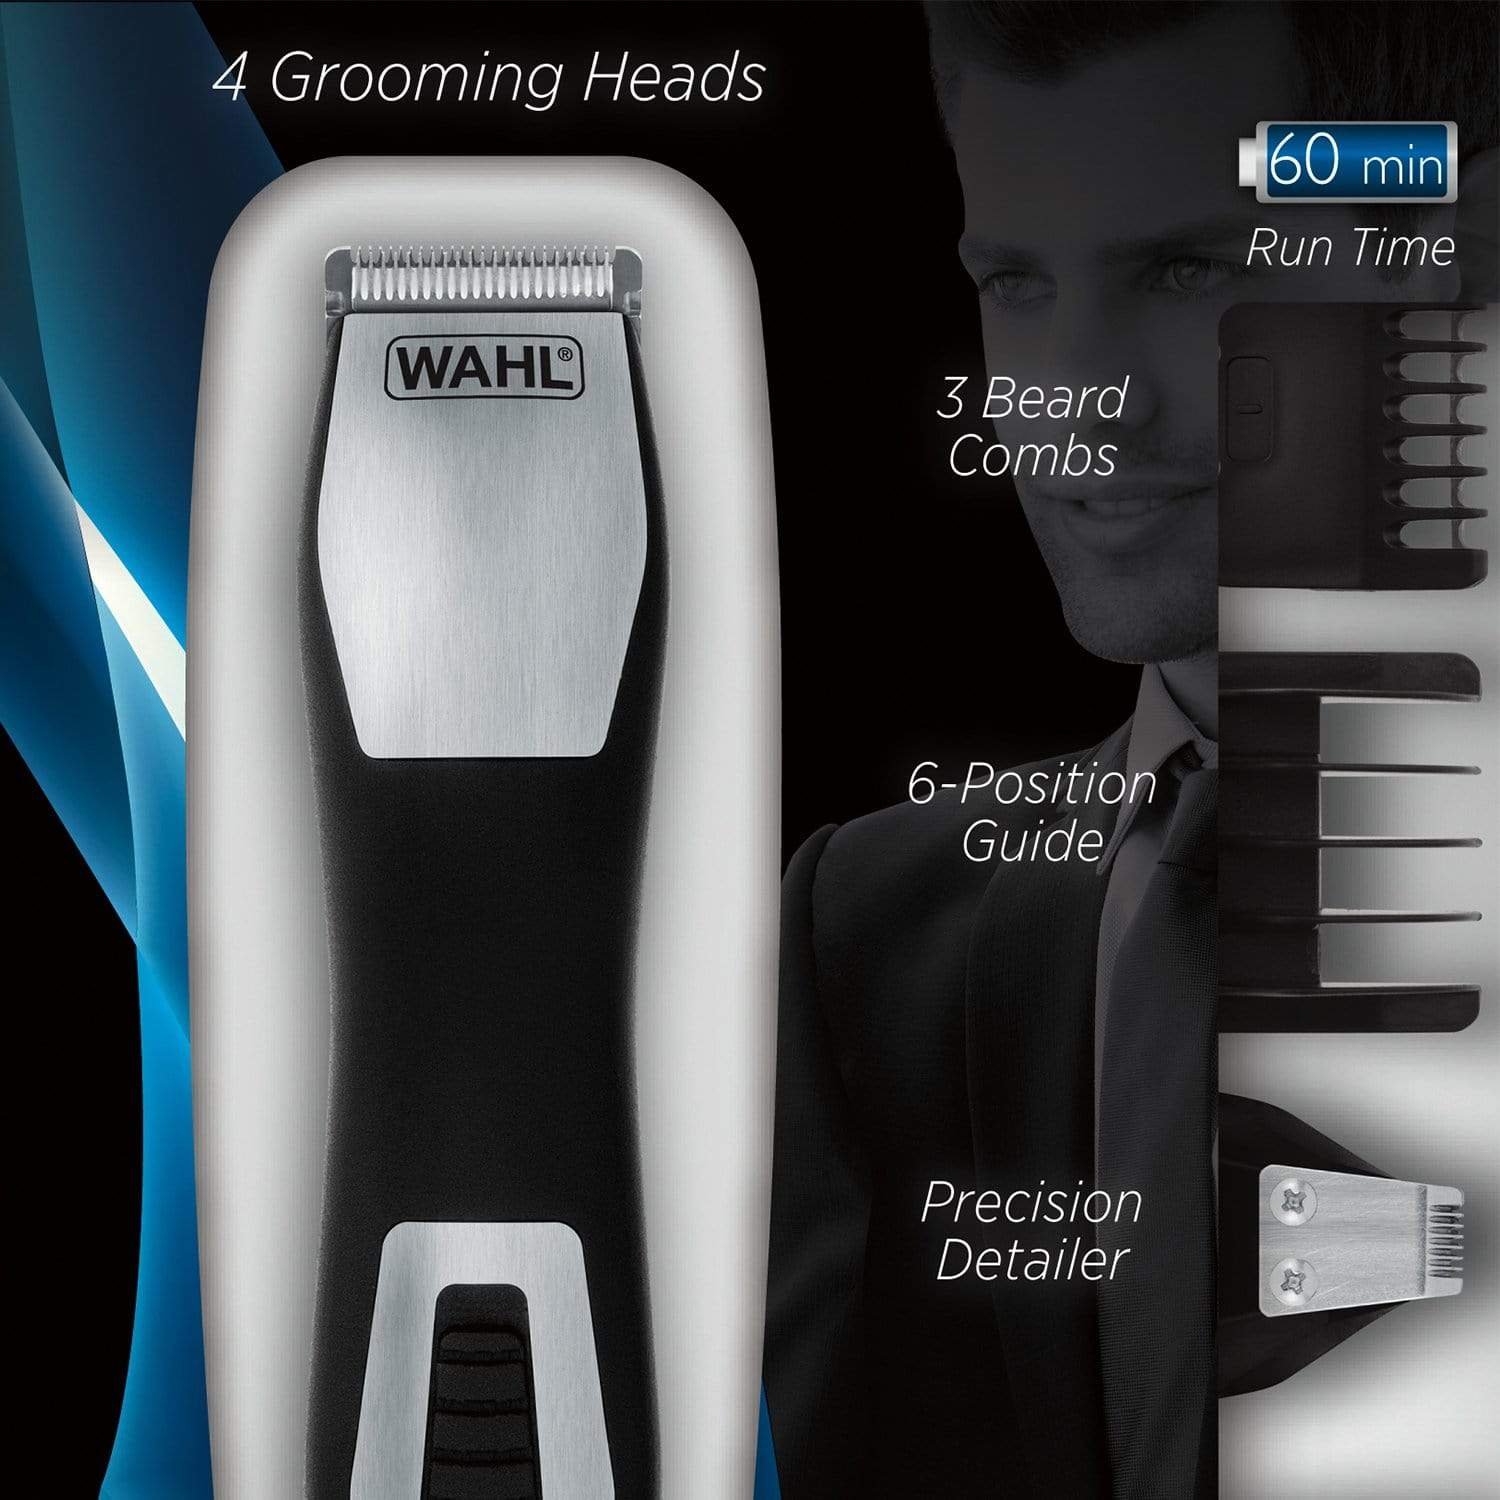 Wahl Groomsman Pro All-in-One Trimmer